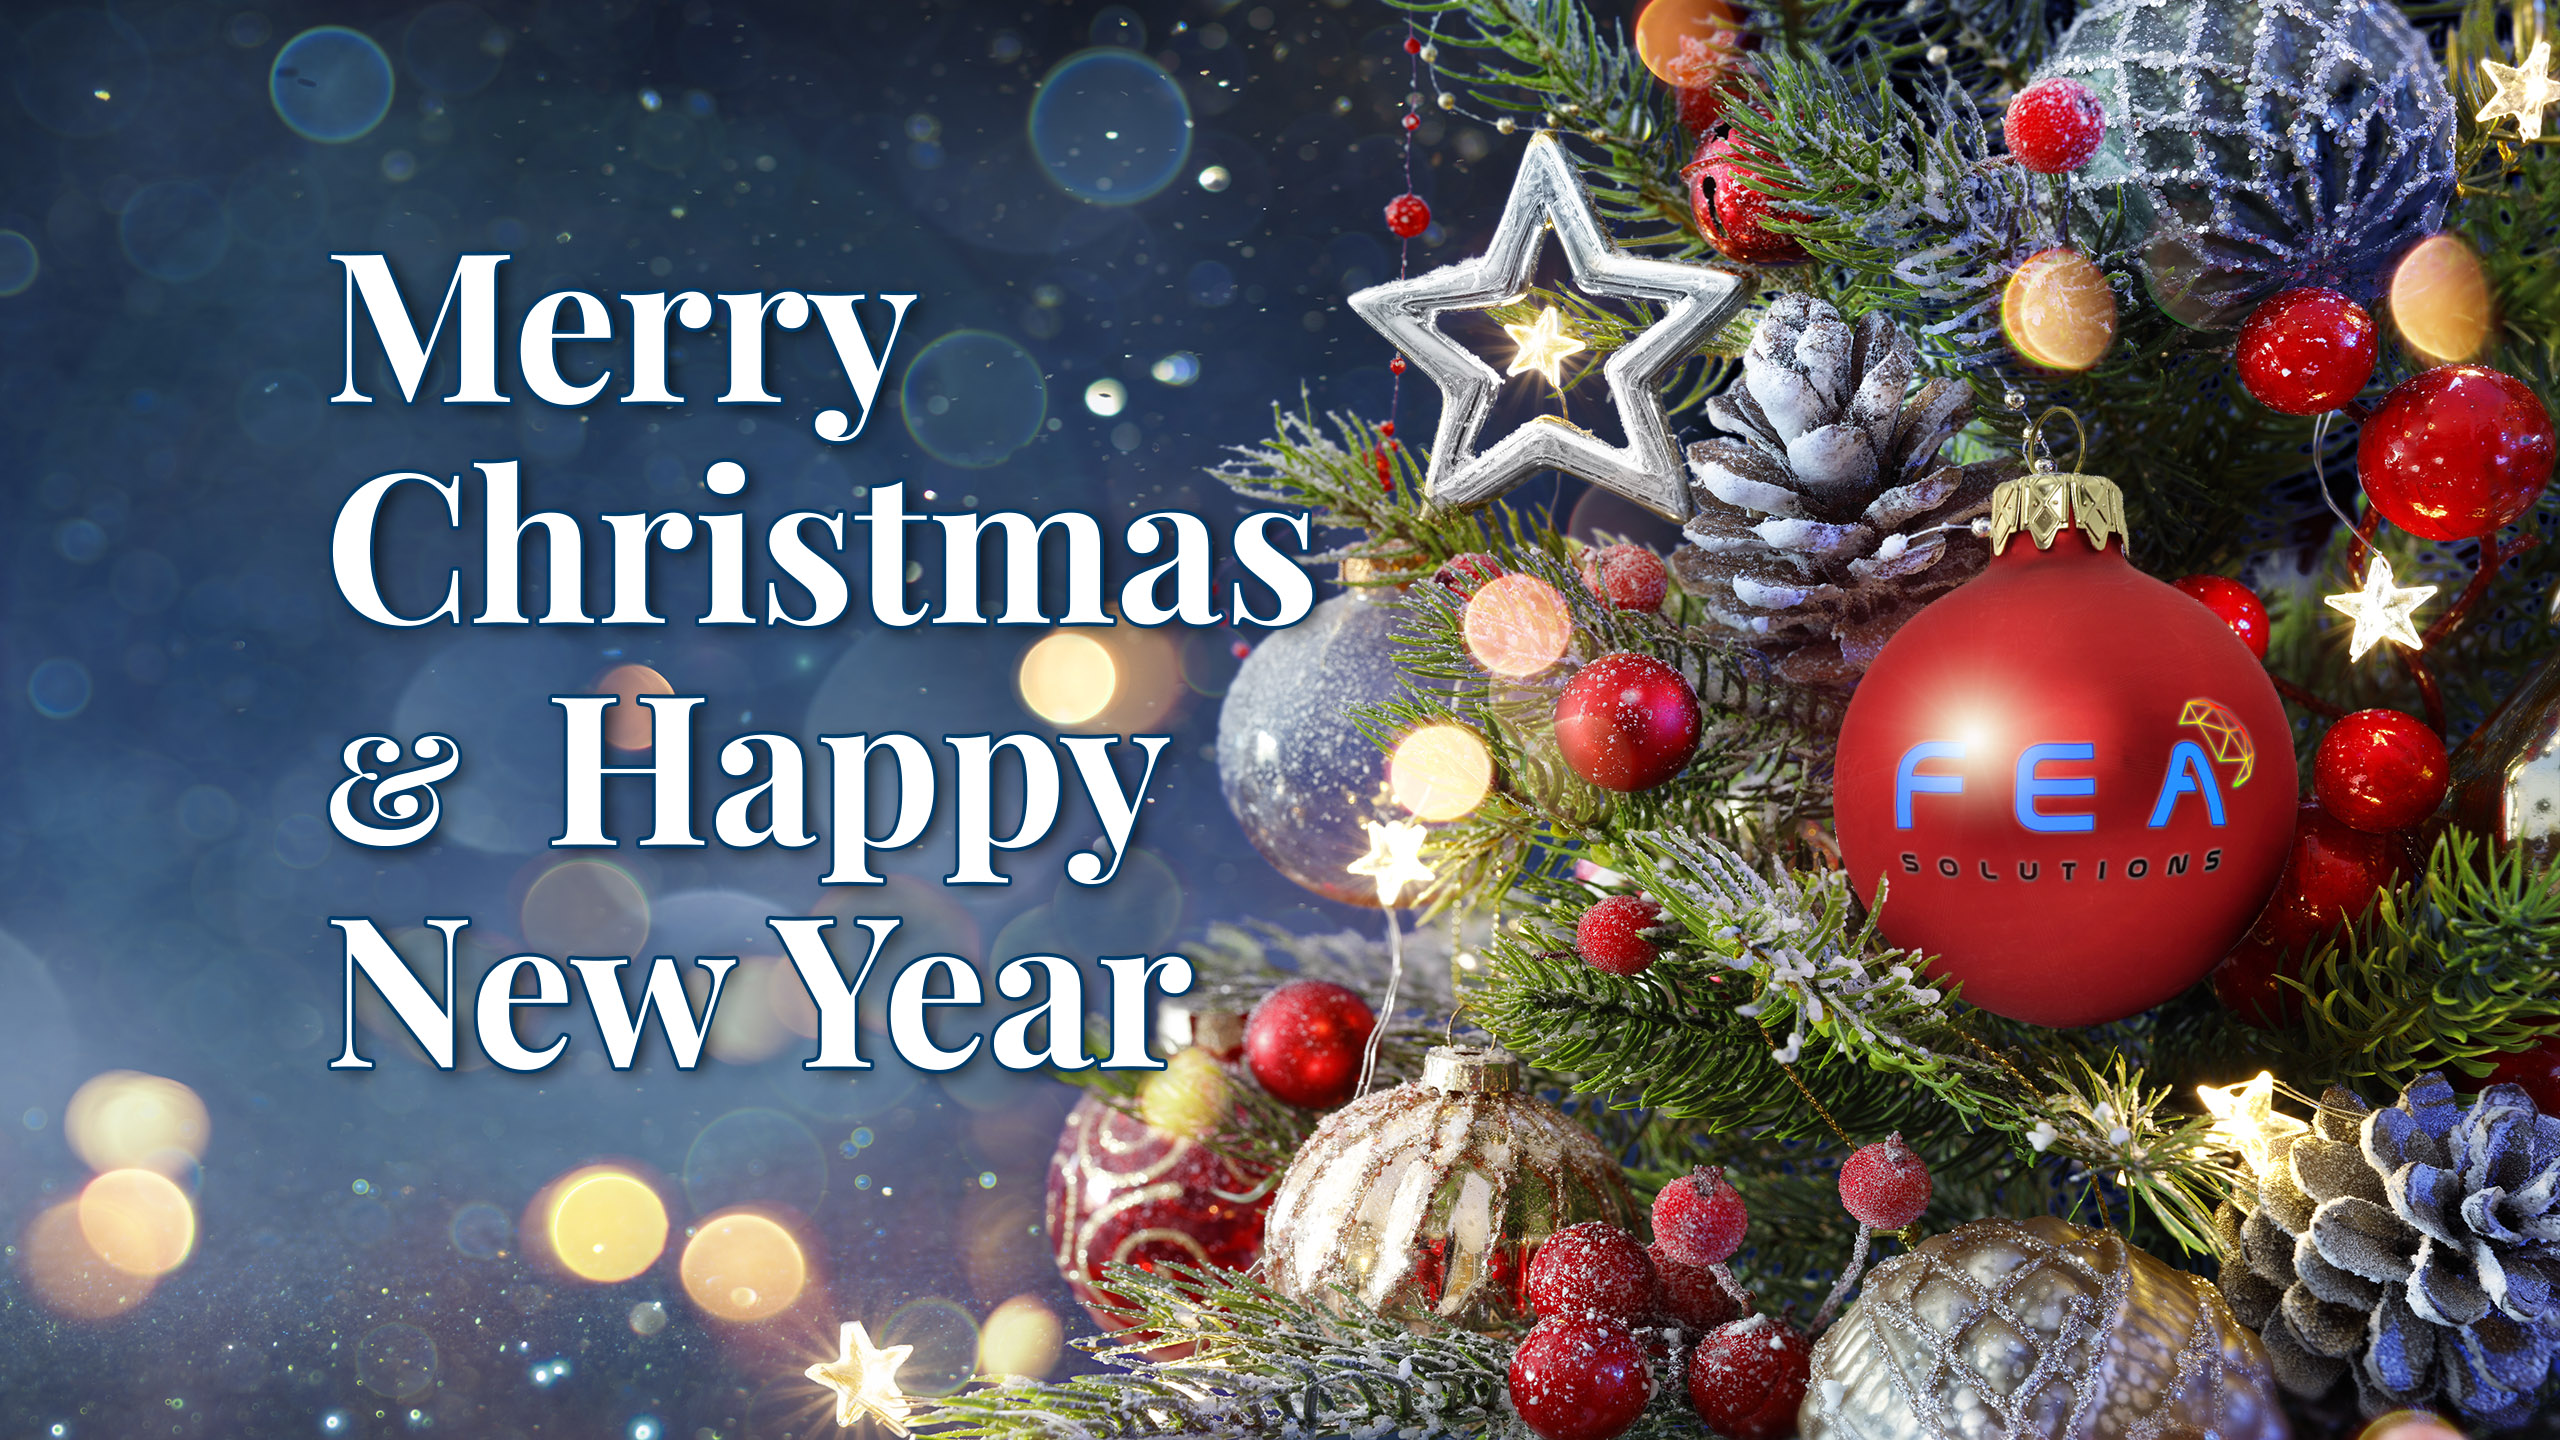 merry christmas message from fea solutions